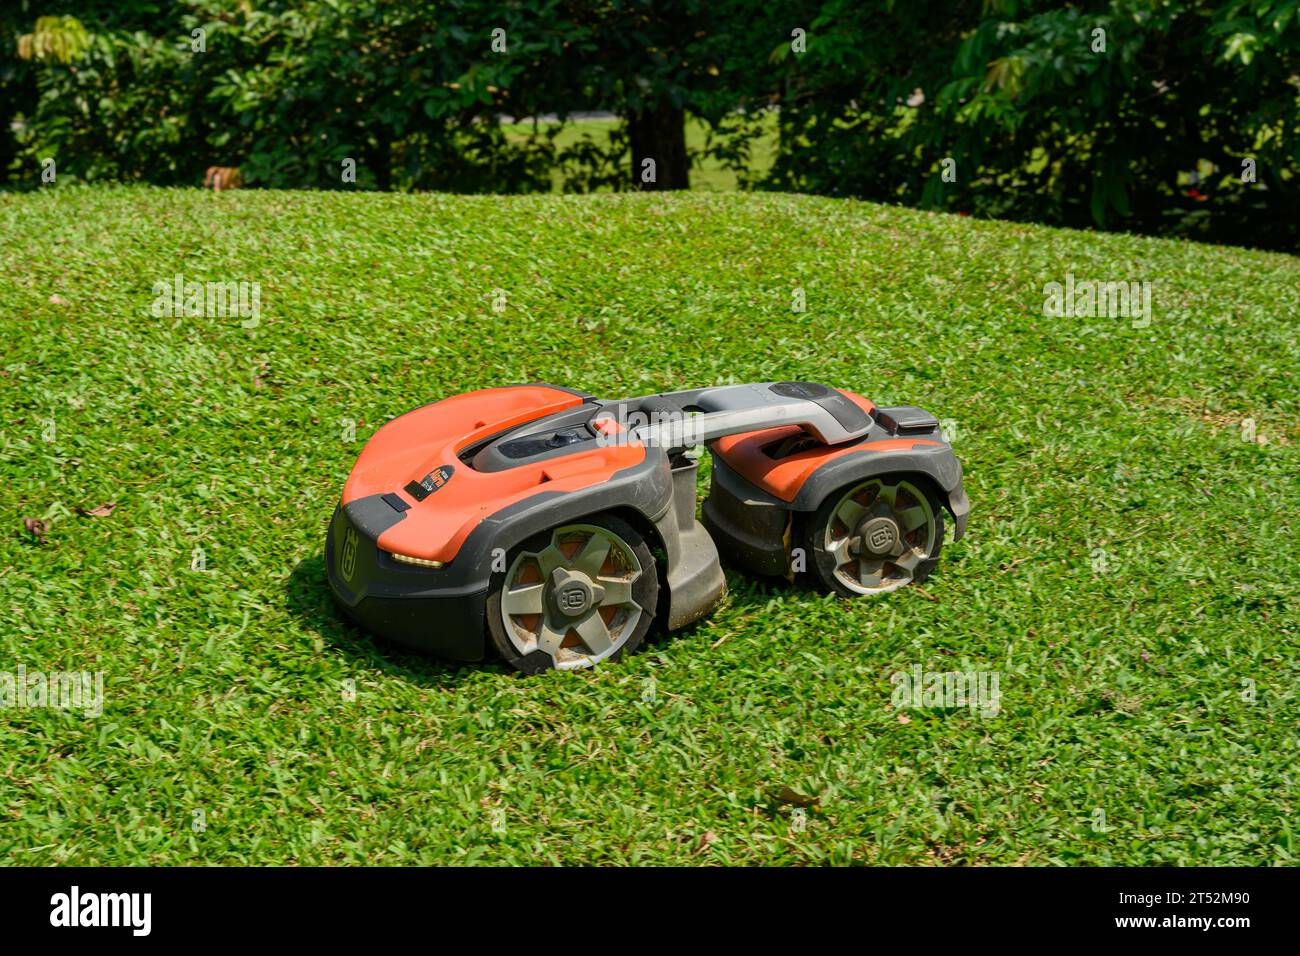 A Husqvarna Robotic Lawn Mower in action on a sunny day Stock Photo